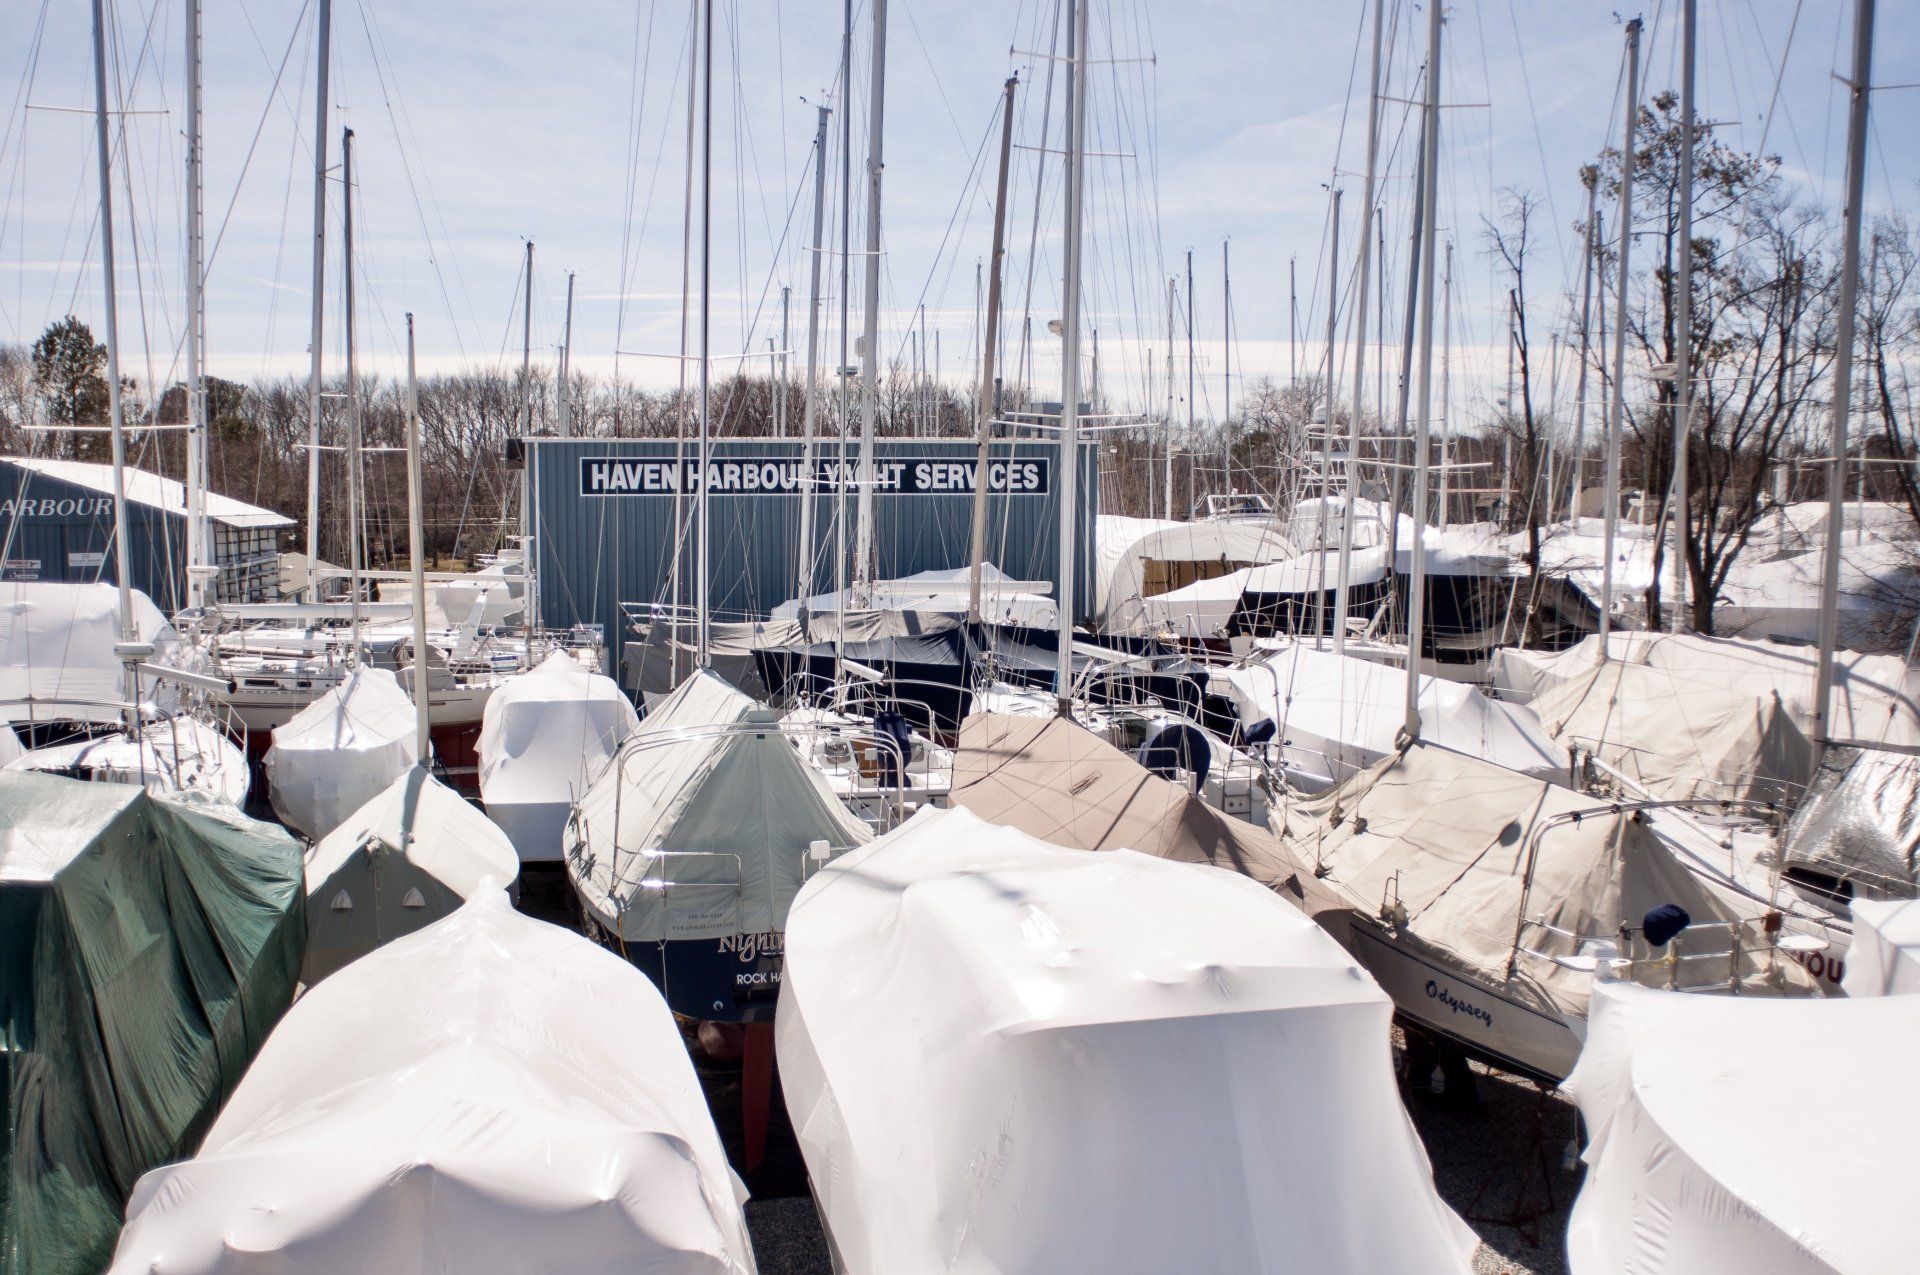 Boatyard with boats on land for winter storage